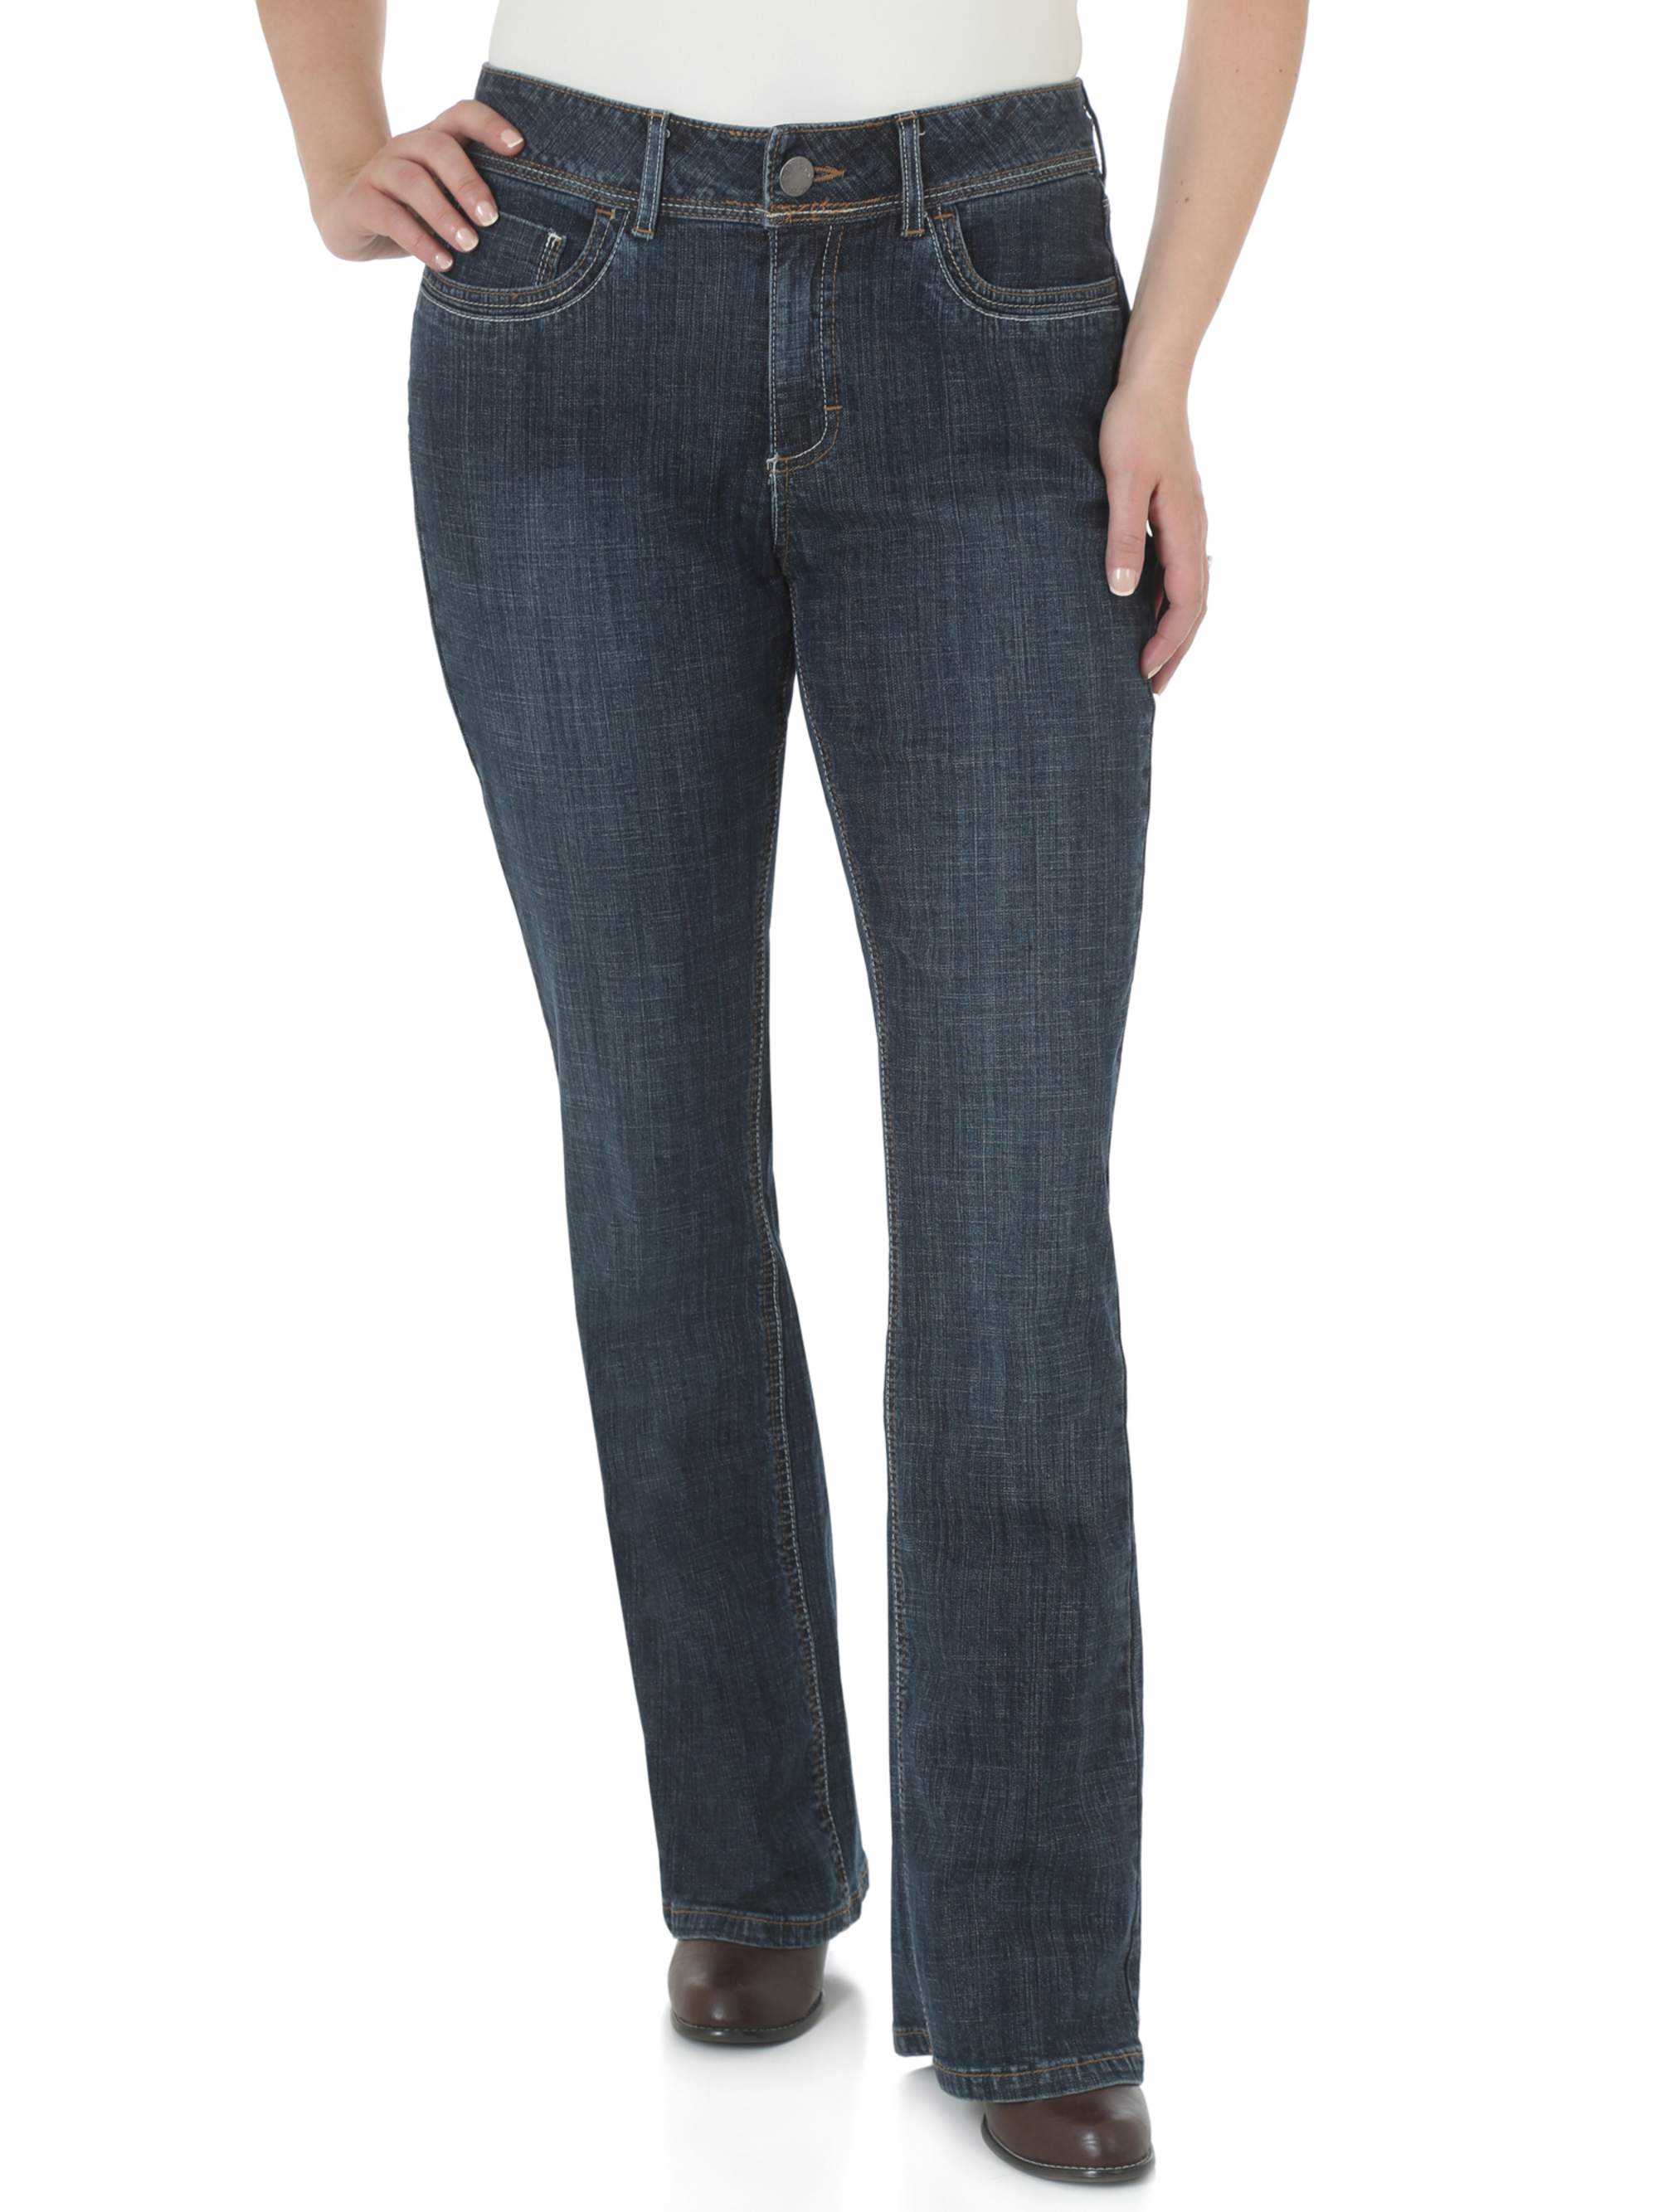 Women's Slender Stretch Bootcut Jean - image 1 of 3